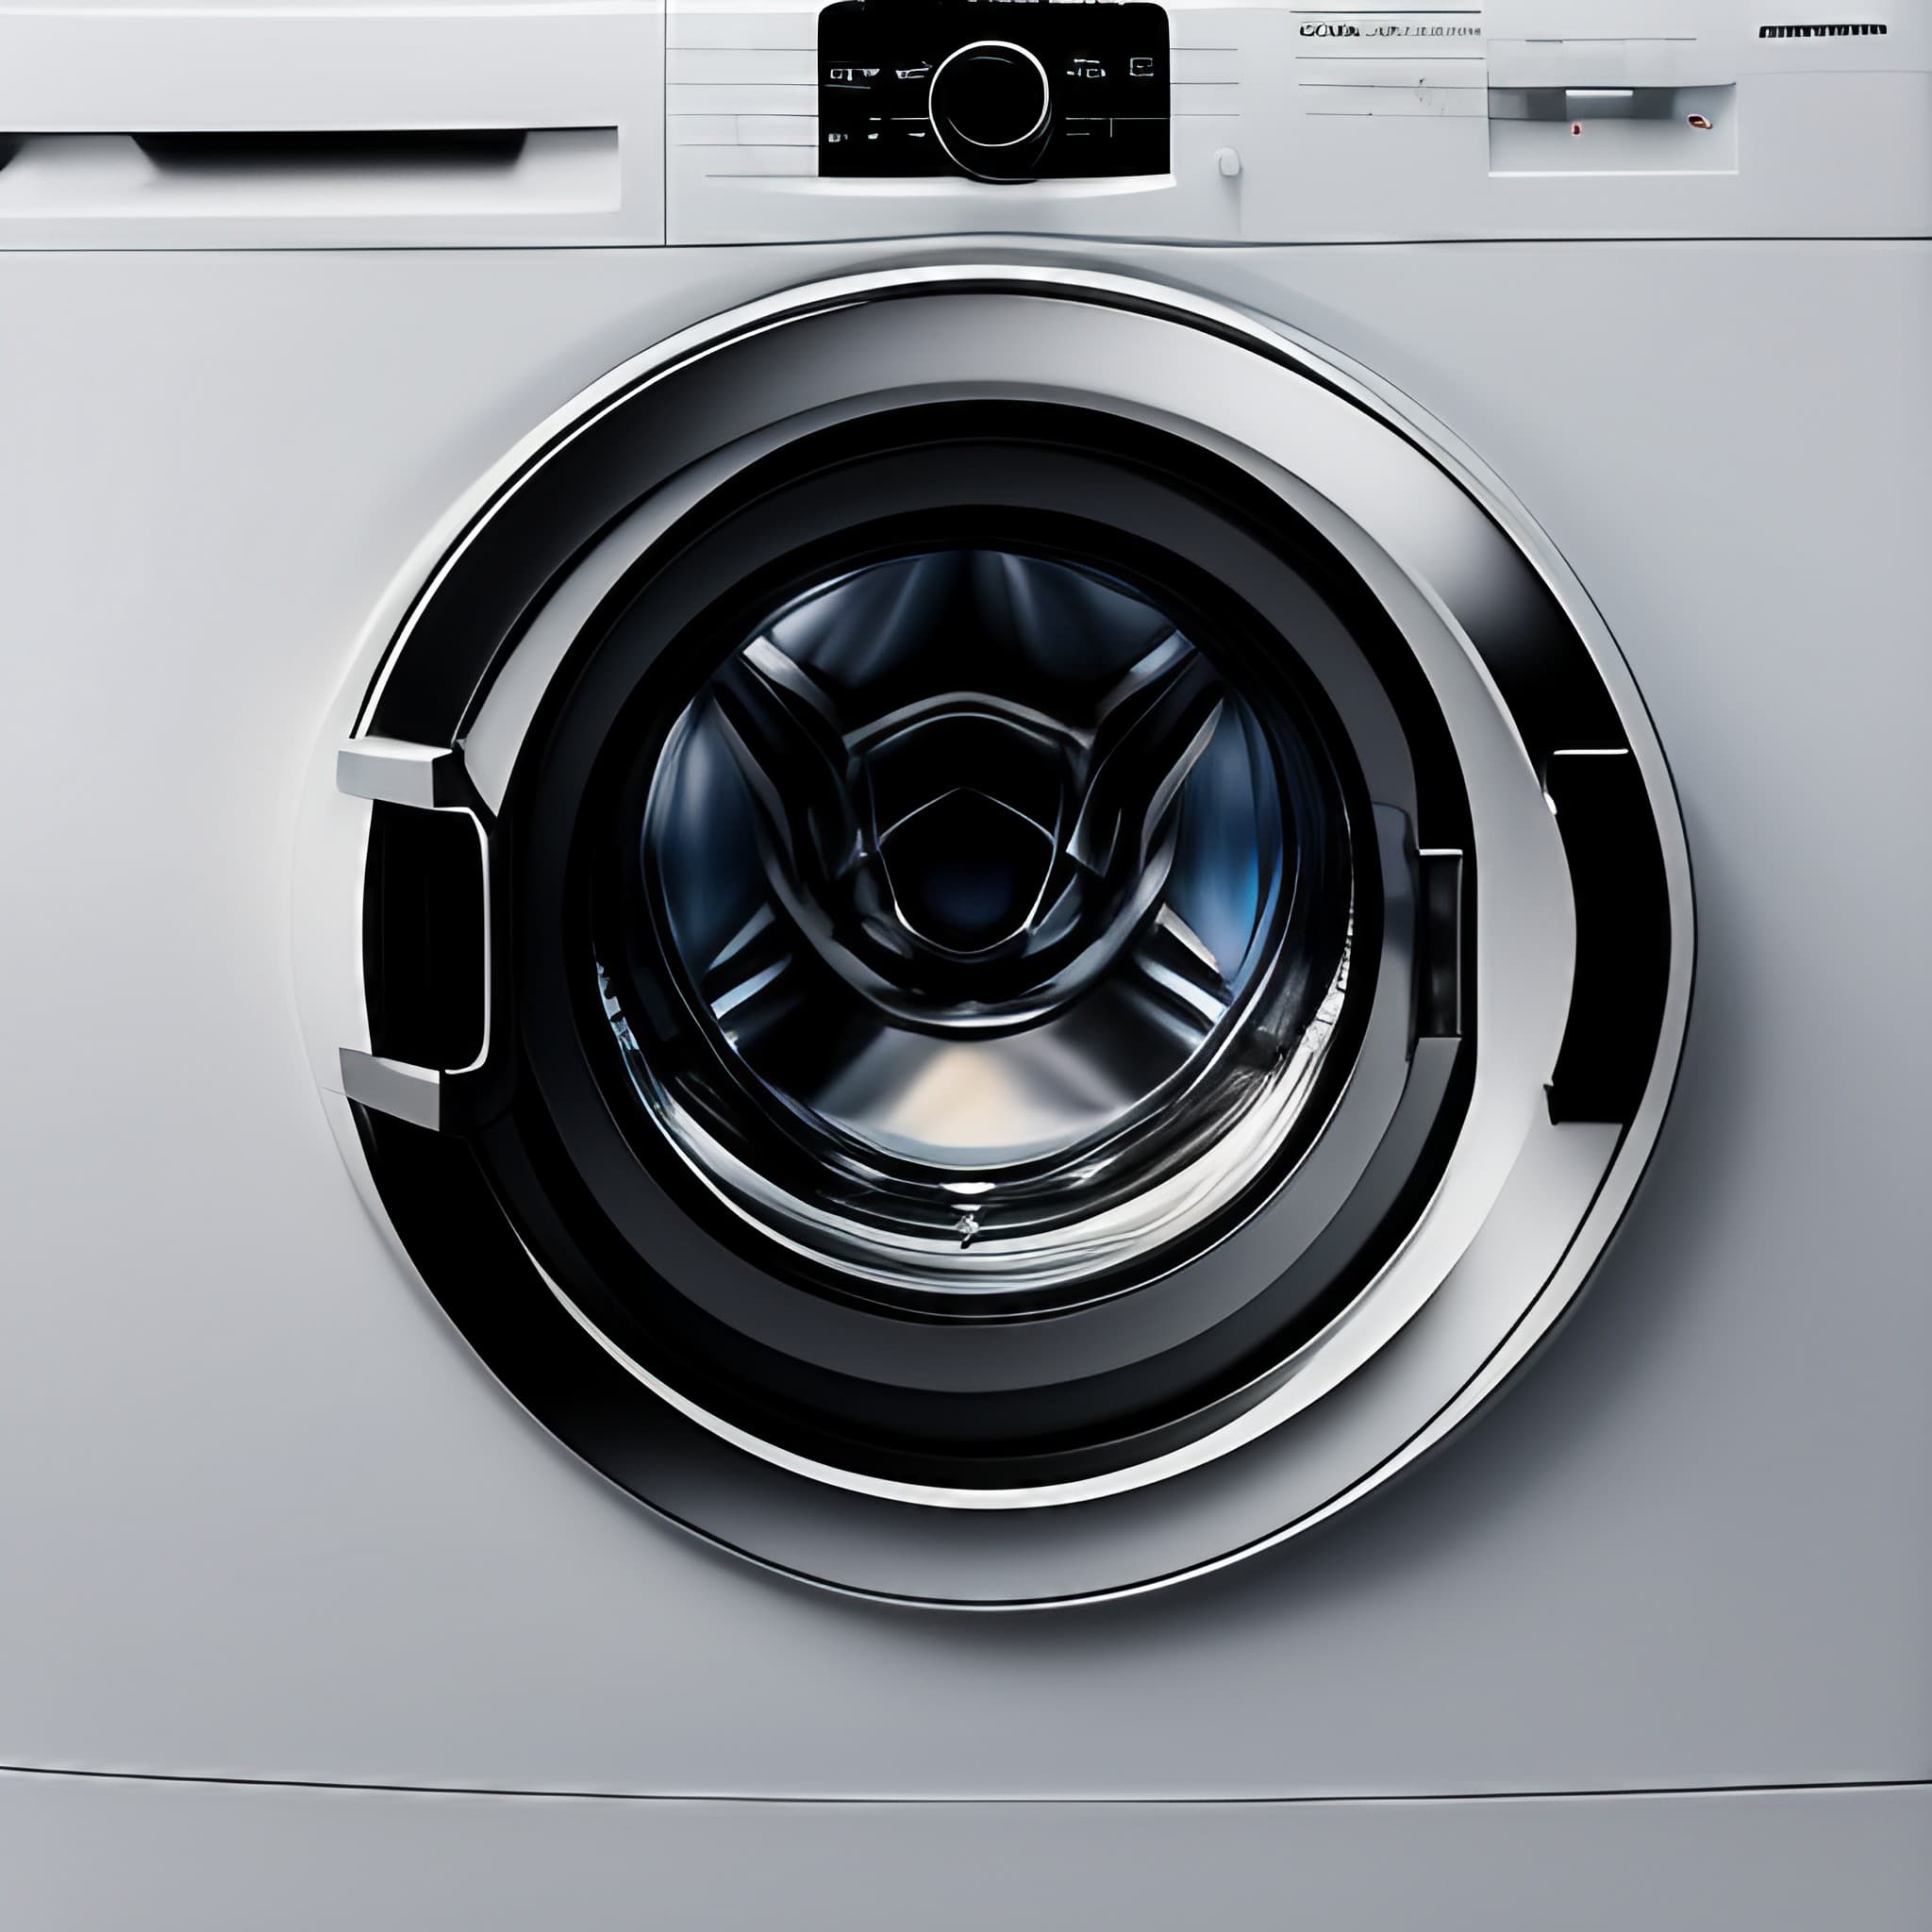 15 Ways to Get Free Appliances for Low-Income Families 